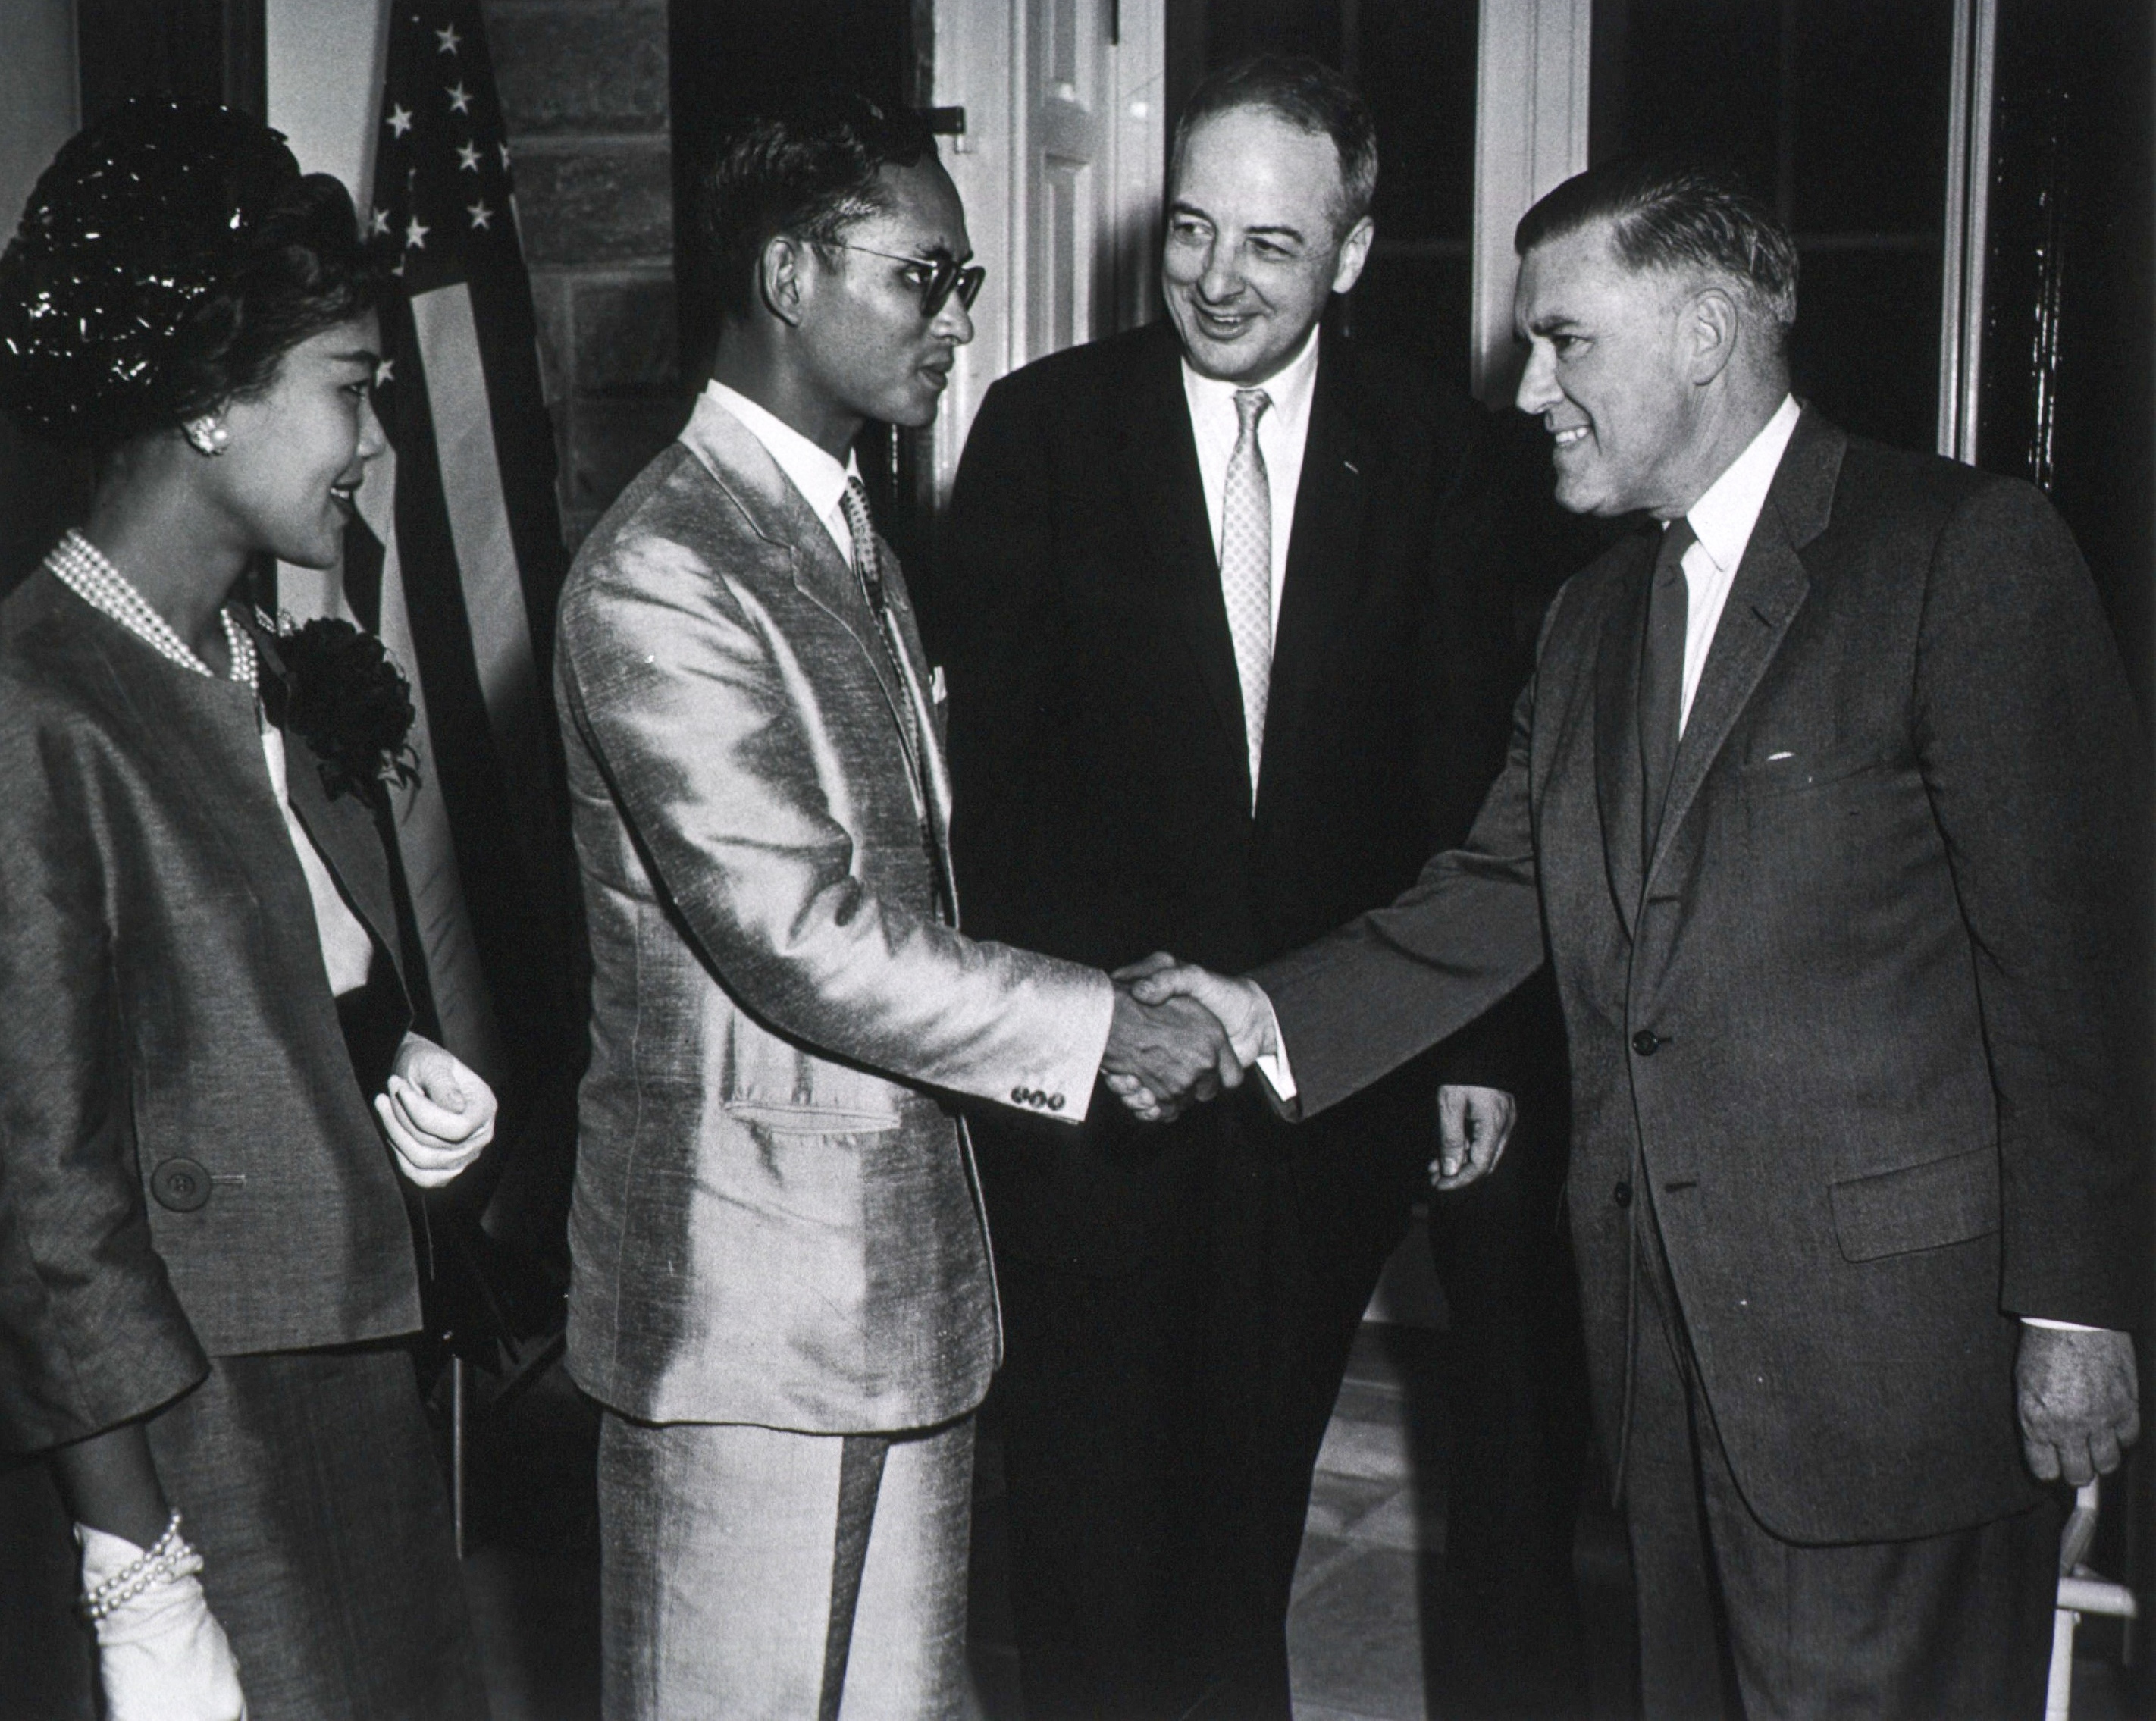 The king of Thailand shaking hands with Roderick Murray during 1960 dedication events